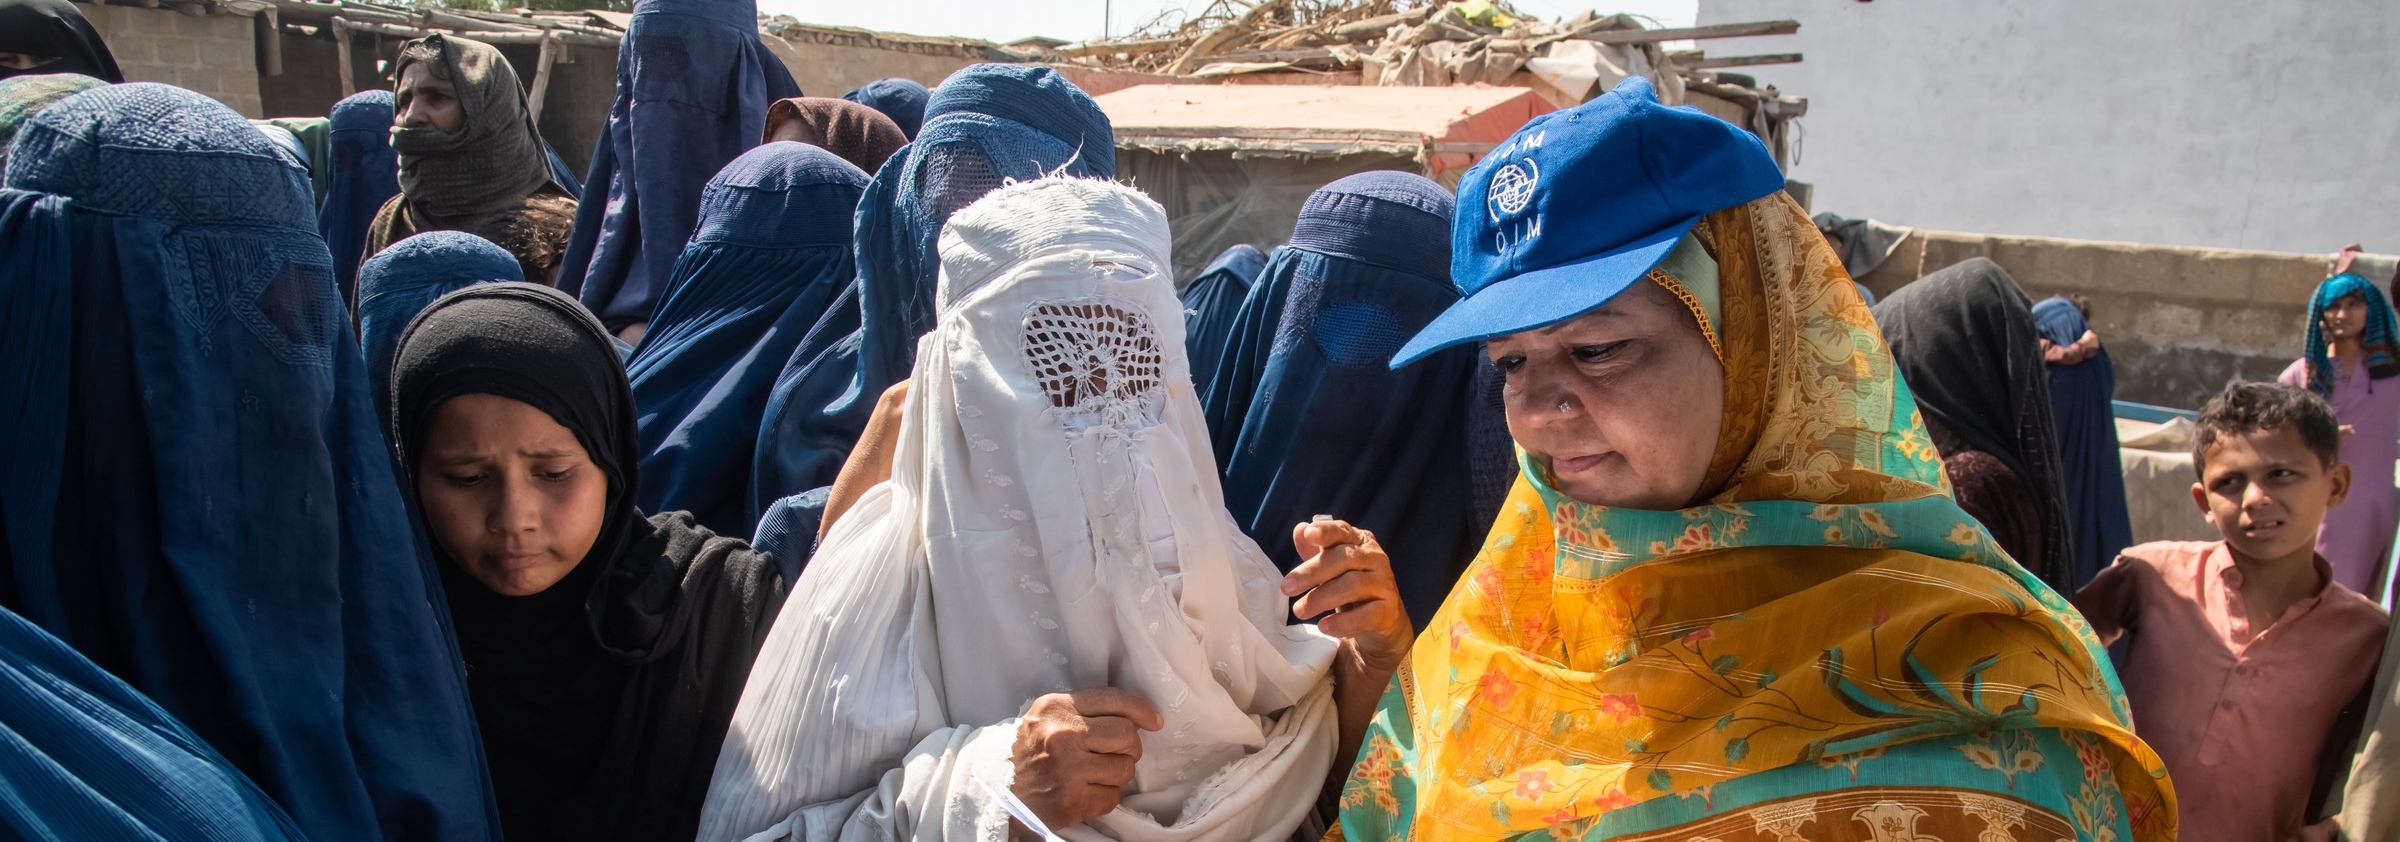 Distribution of multipurpose cash assistance in Karachi to Afghan nationals in need of humanitarian assistance. © IOM Pakistan 2022